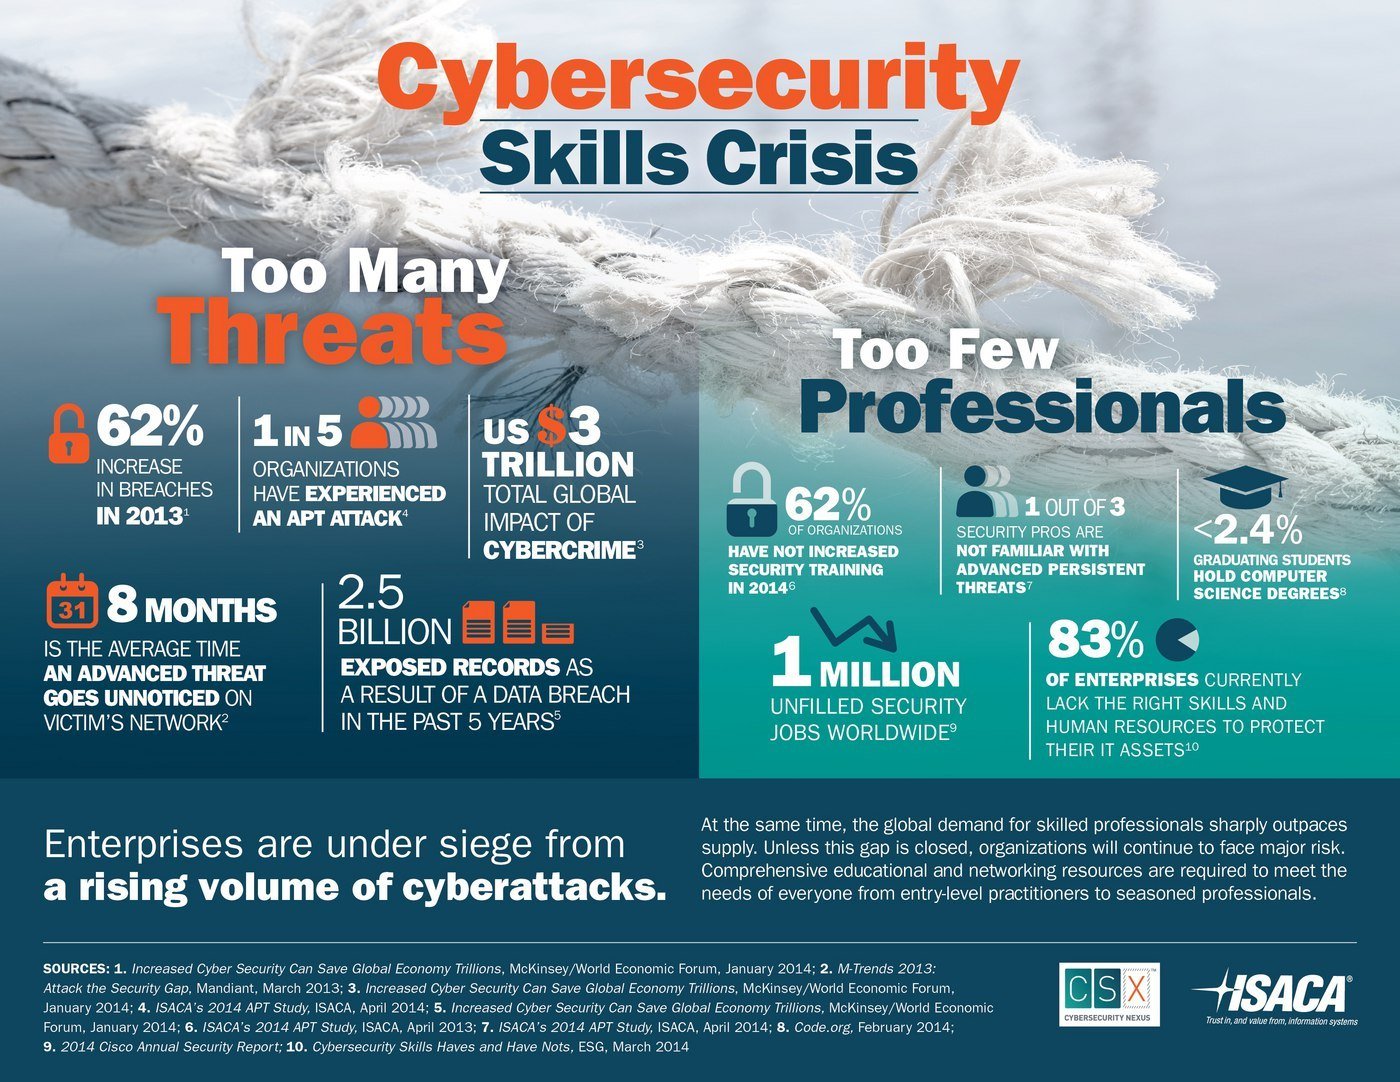 ISACA_Cybersecurity_Infographic1.jpg